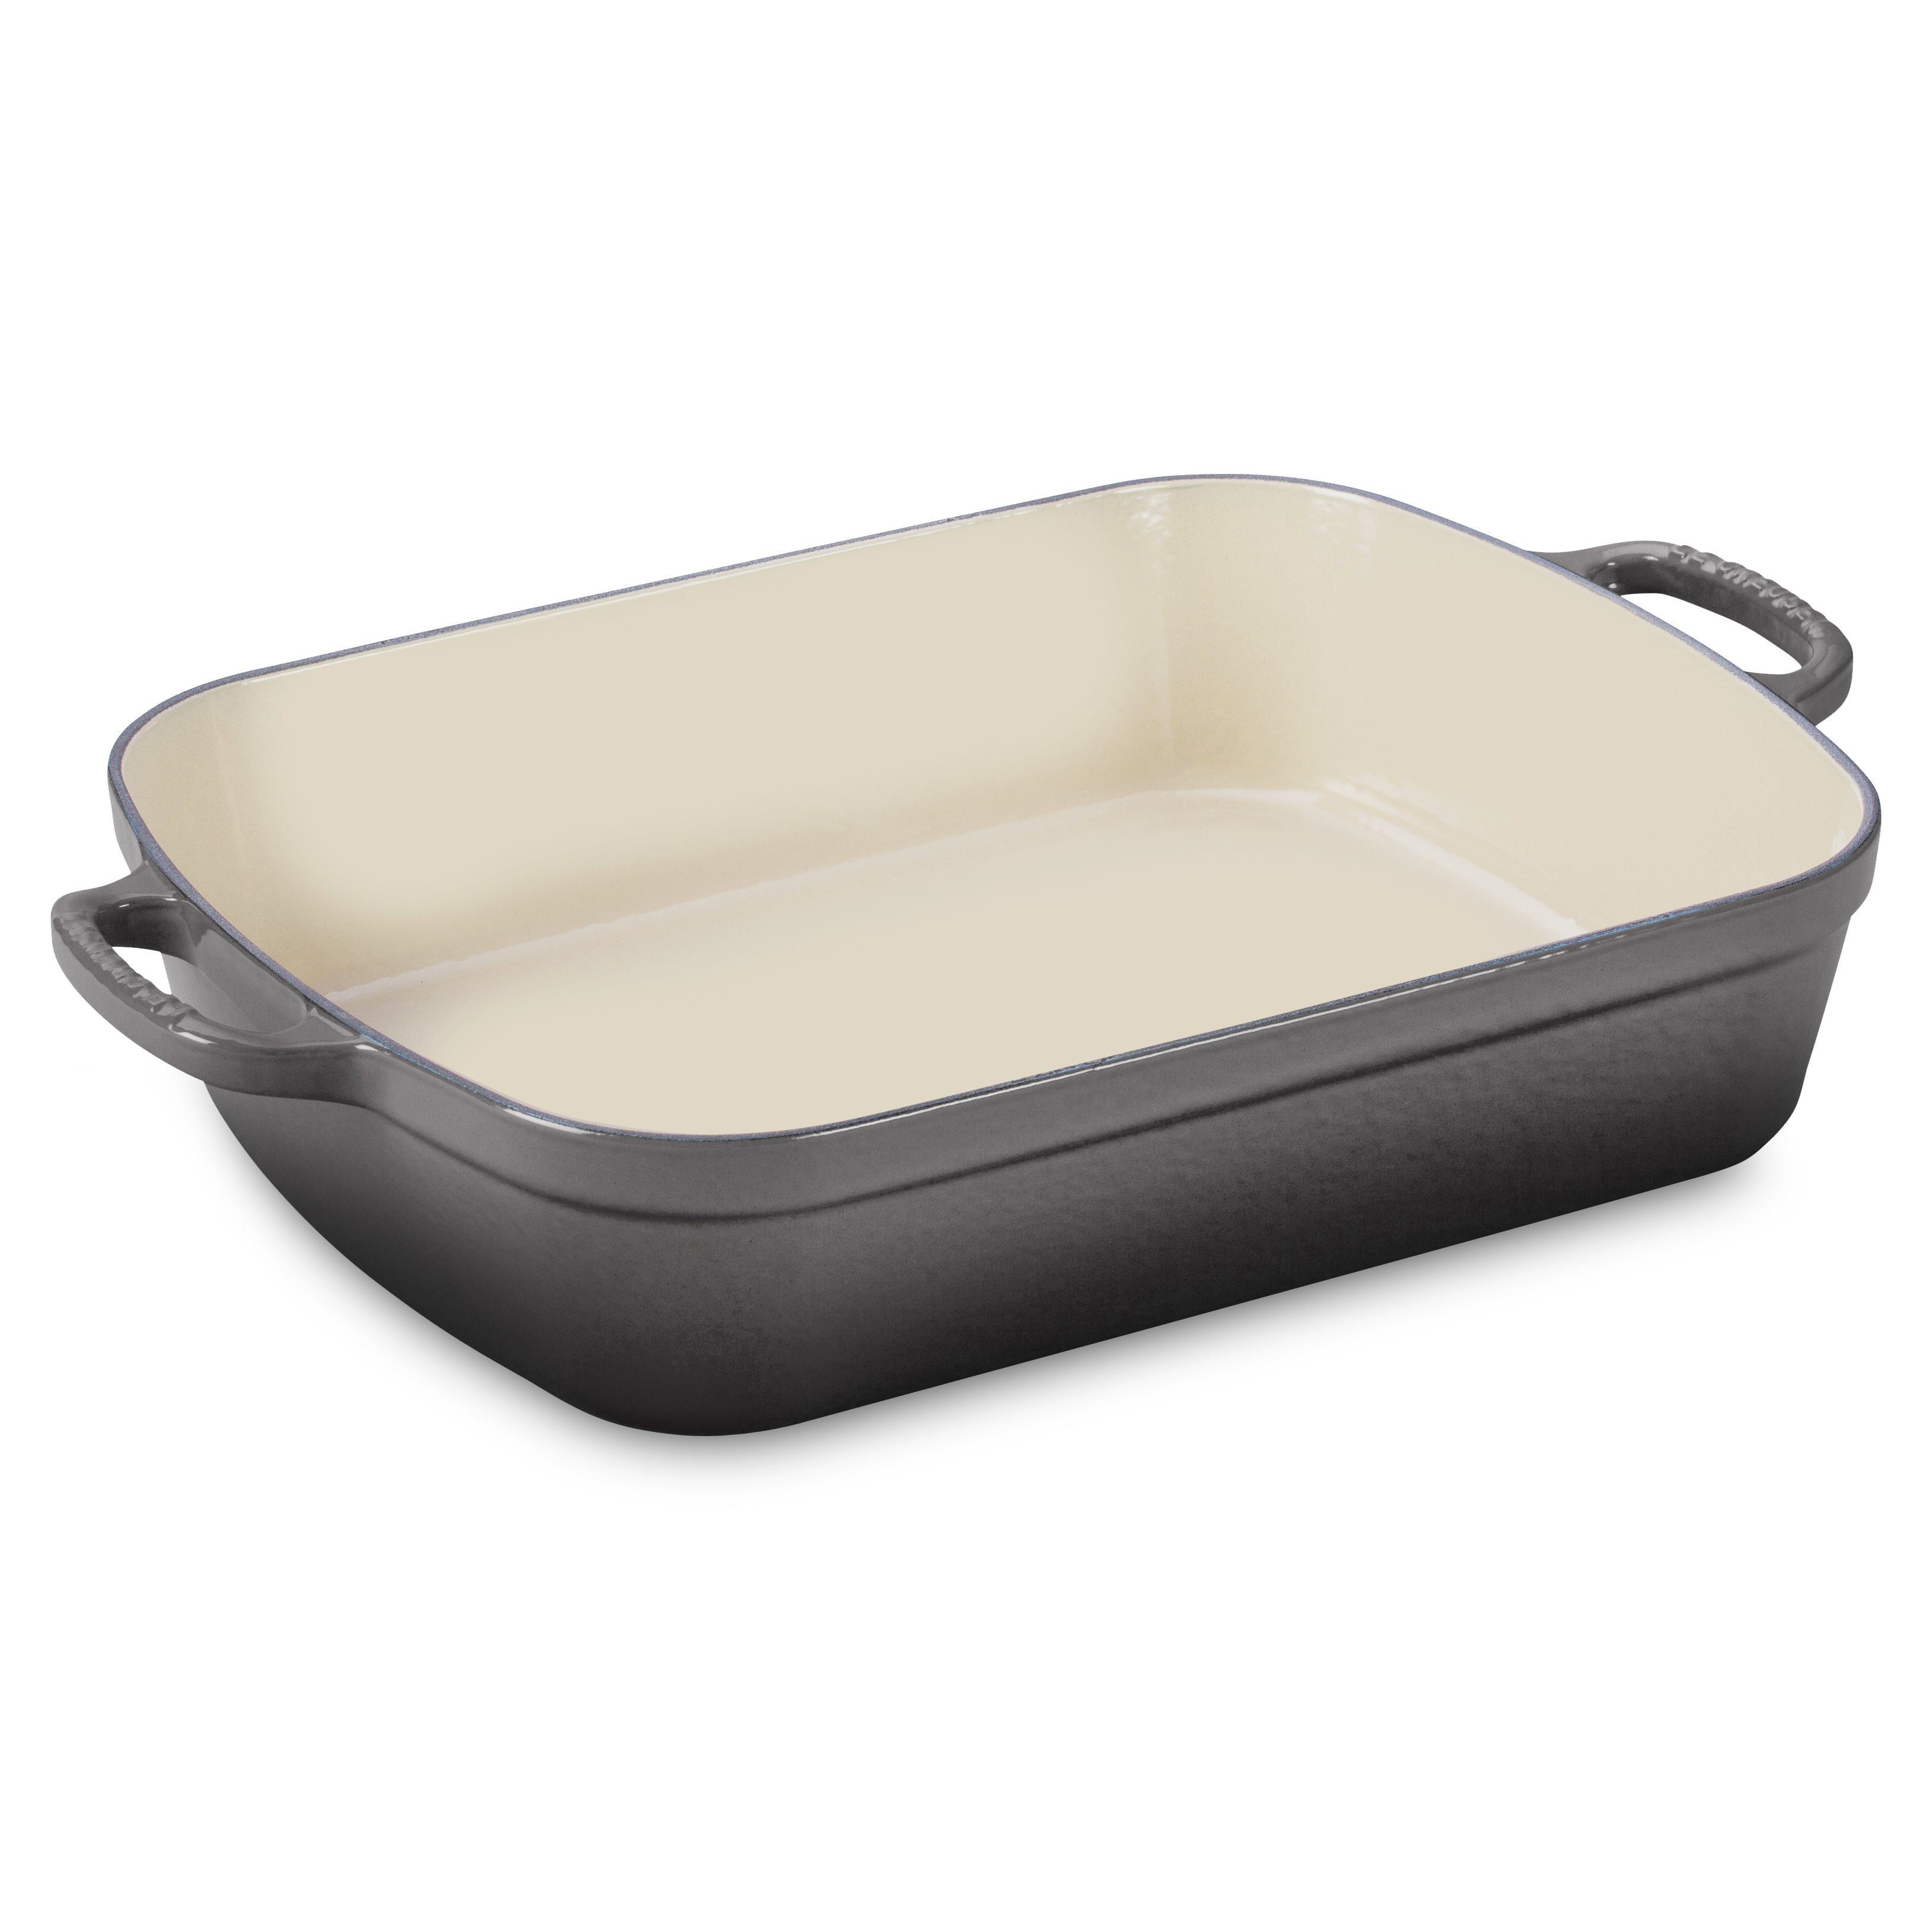 This Le Creuset Roasting Pan Will Get Through Every Holiday